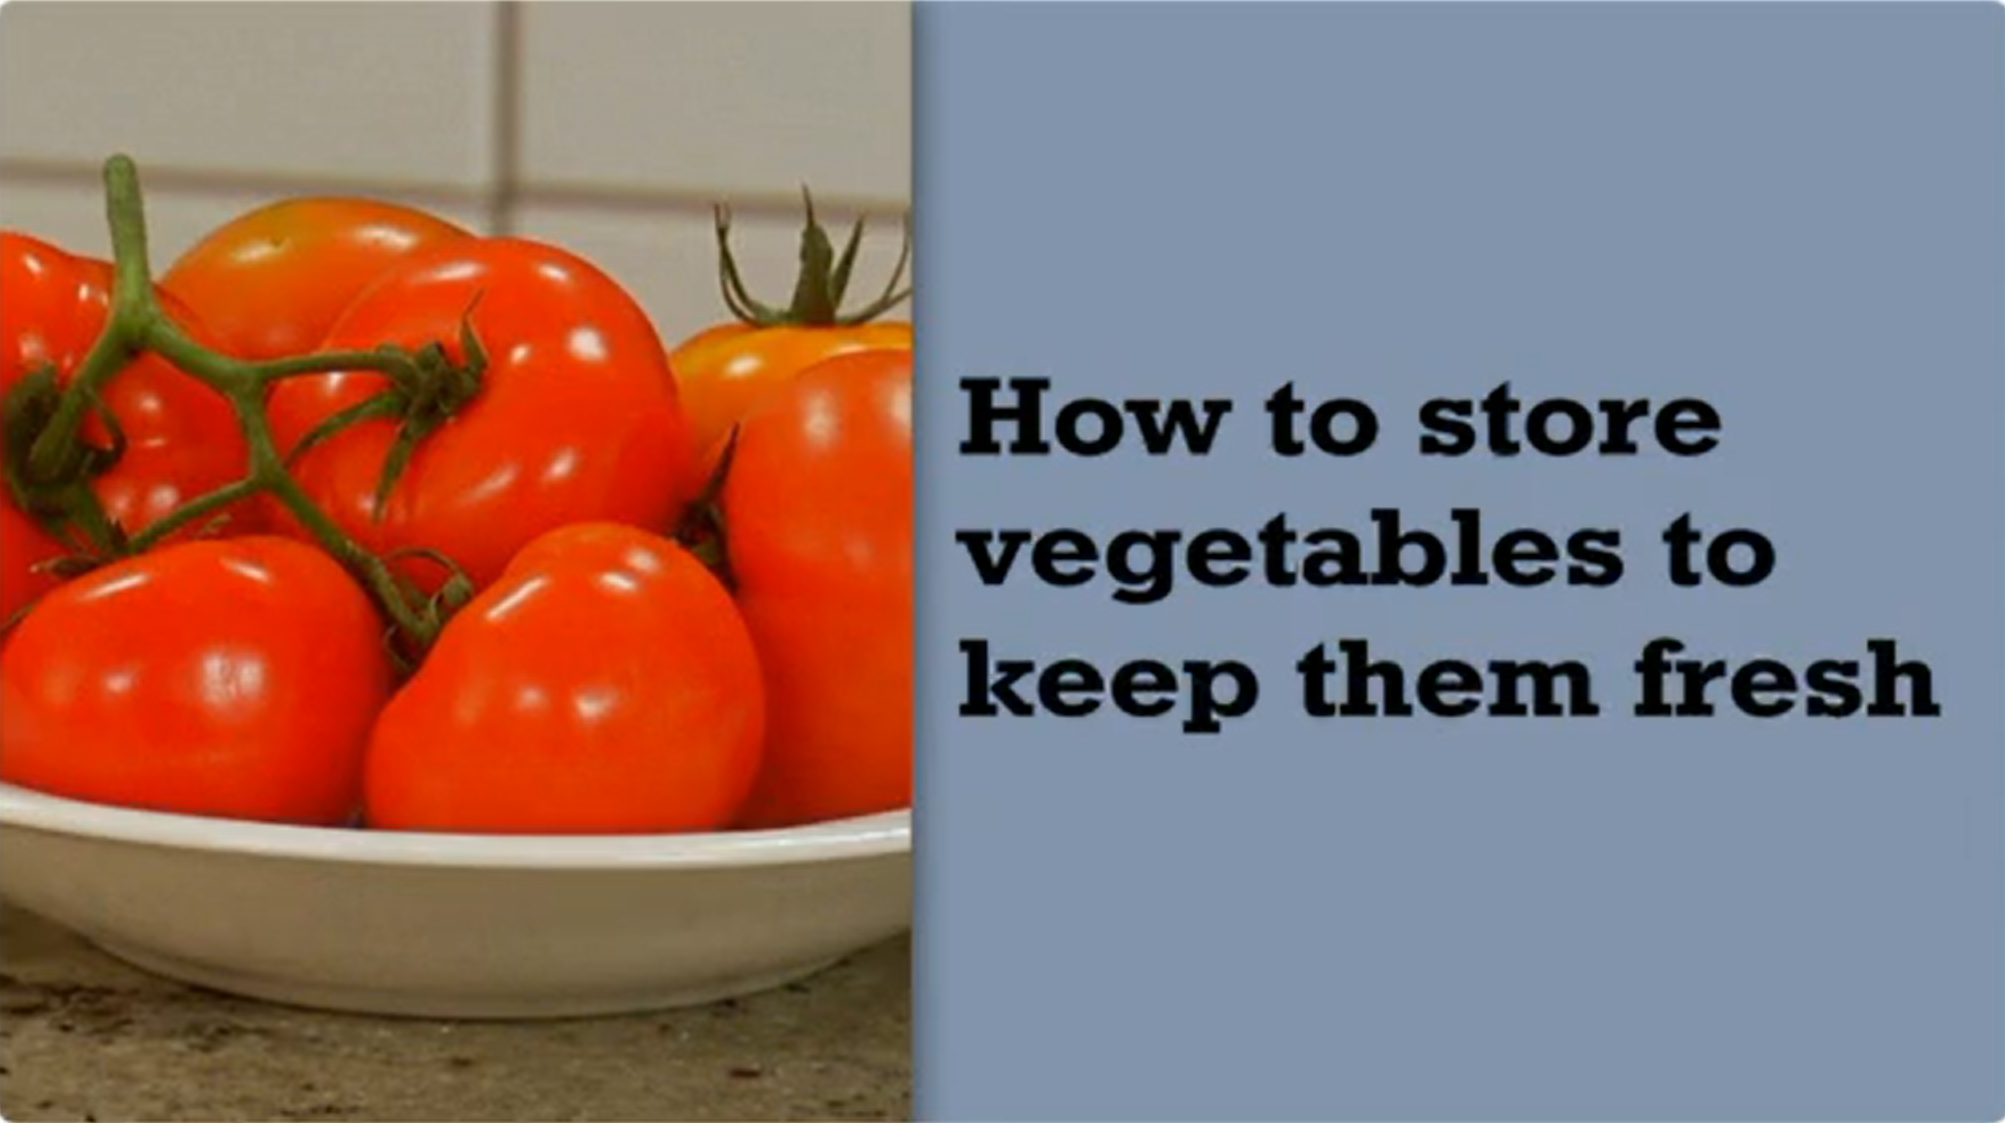 How to store vegetables to keep them fresh